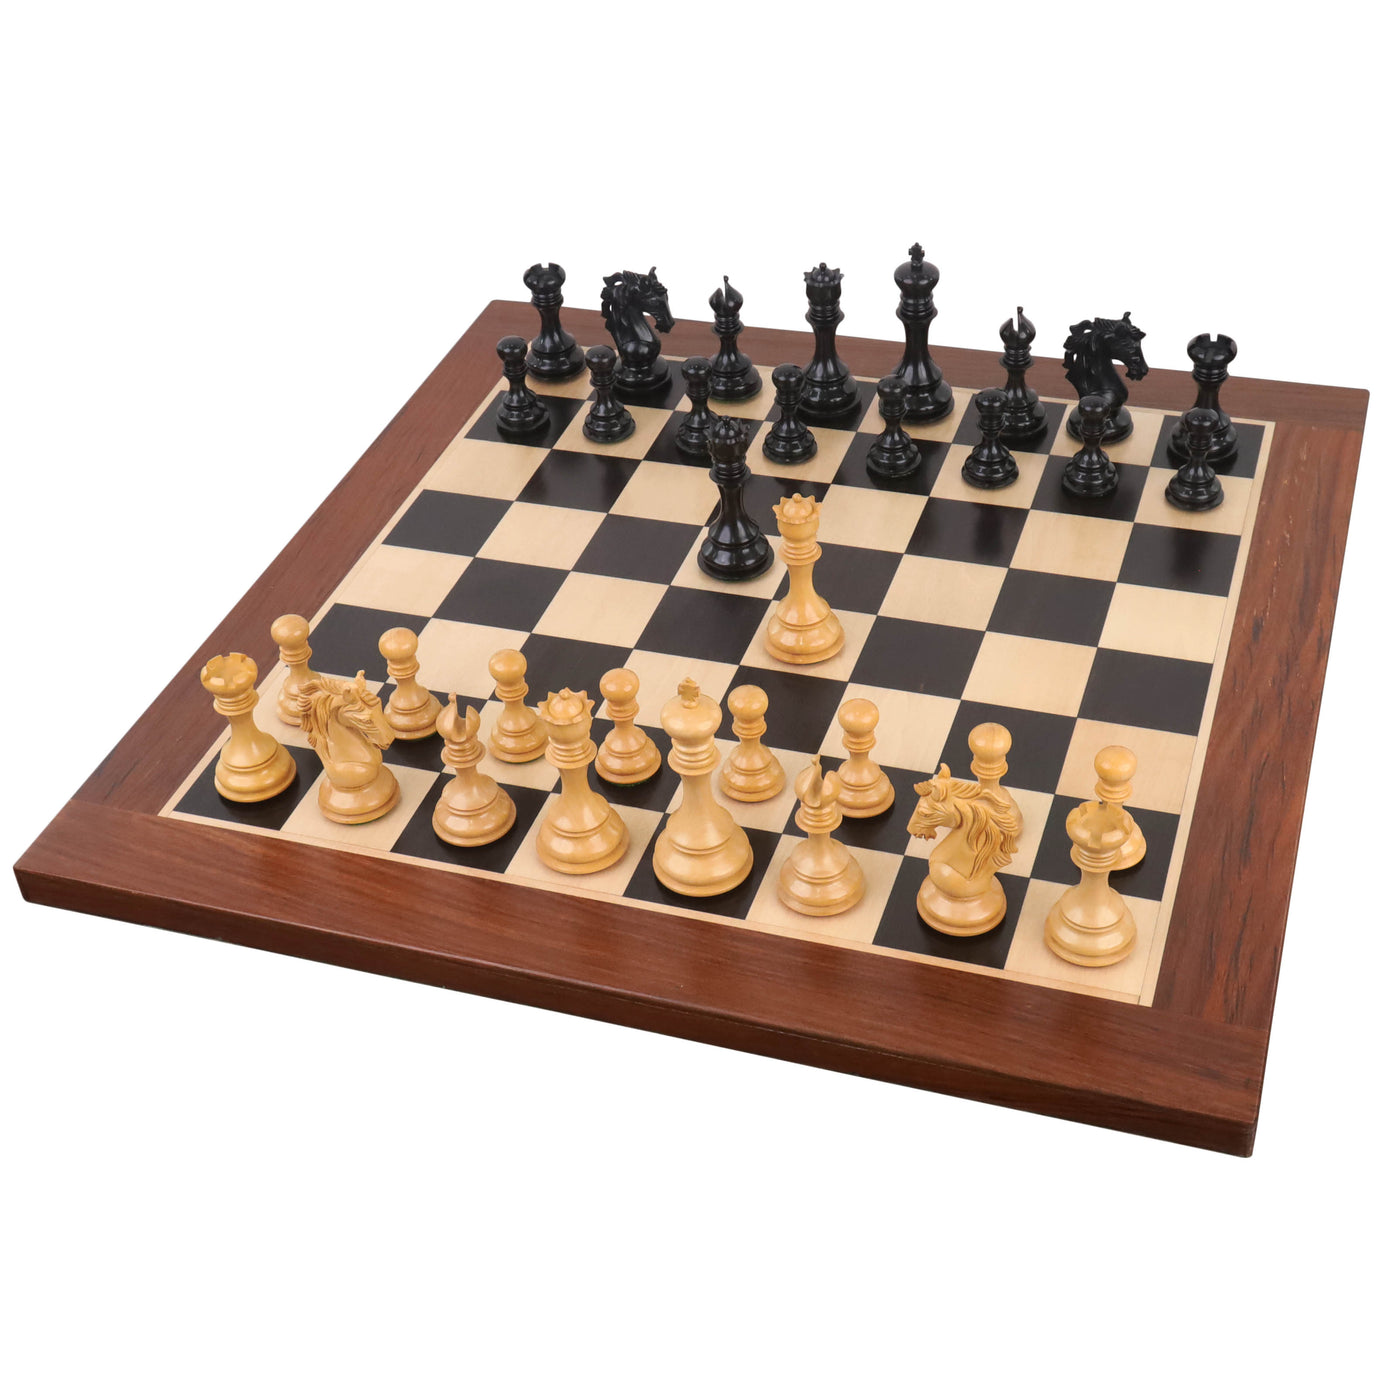 Combo of Goliath Series Luxury Staunton Chess Set - Pieces in Ebony Wood with Board and Box